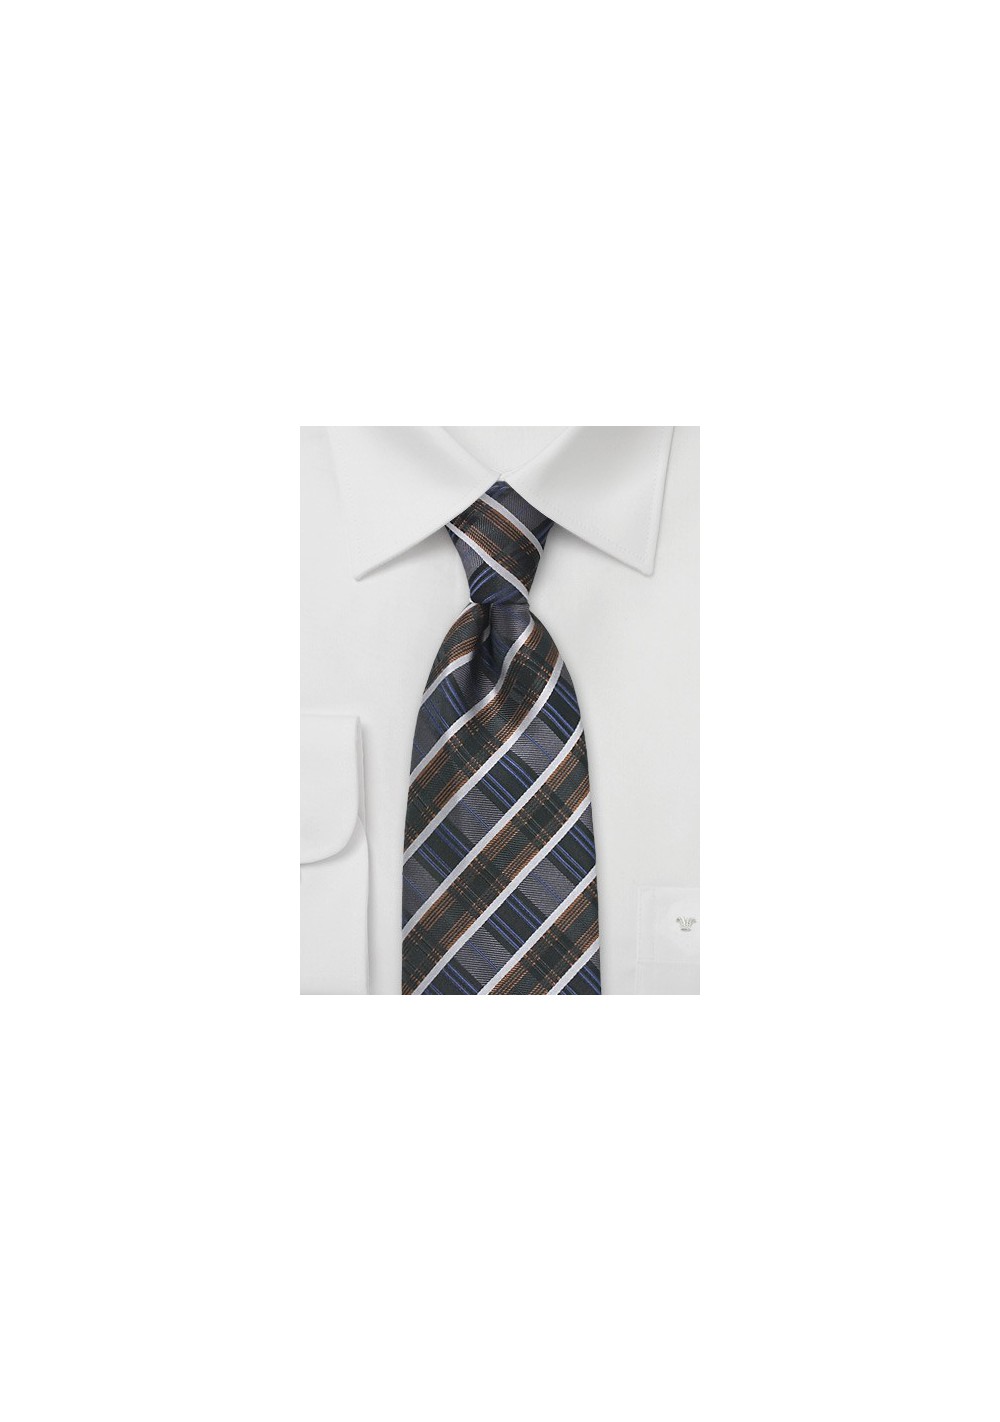 Art Deco Striped Tie in Greys and Blues